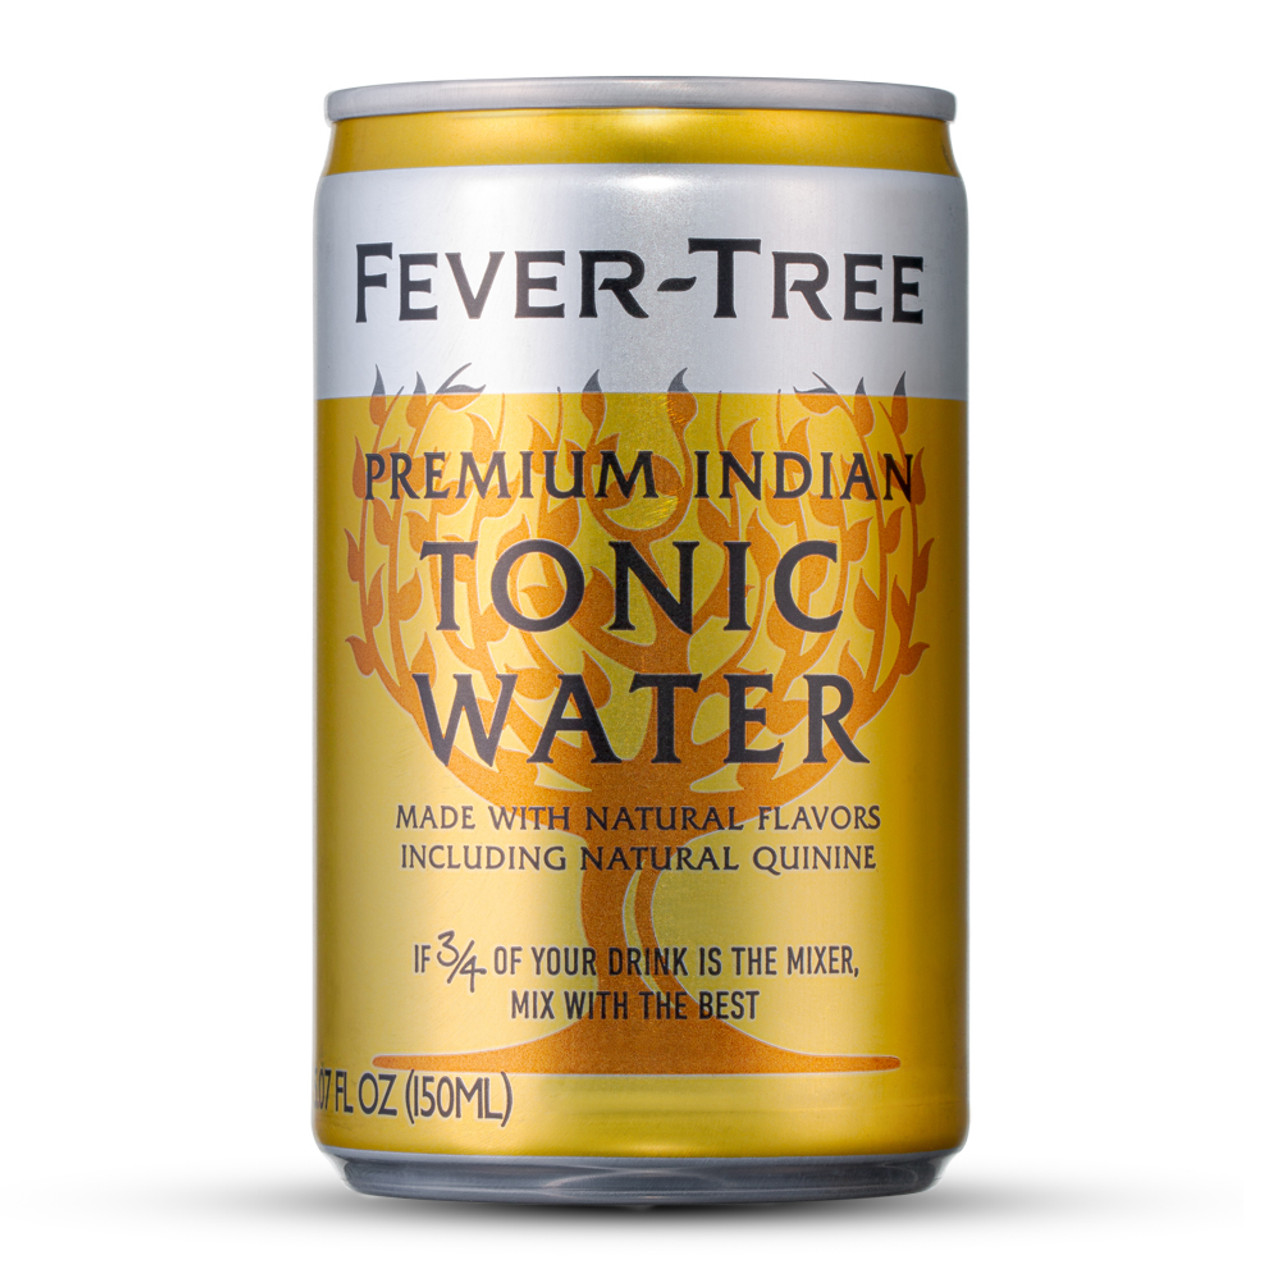 Fever Tree Premium Indian Tonic Water - 5 oz Can